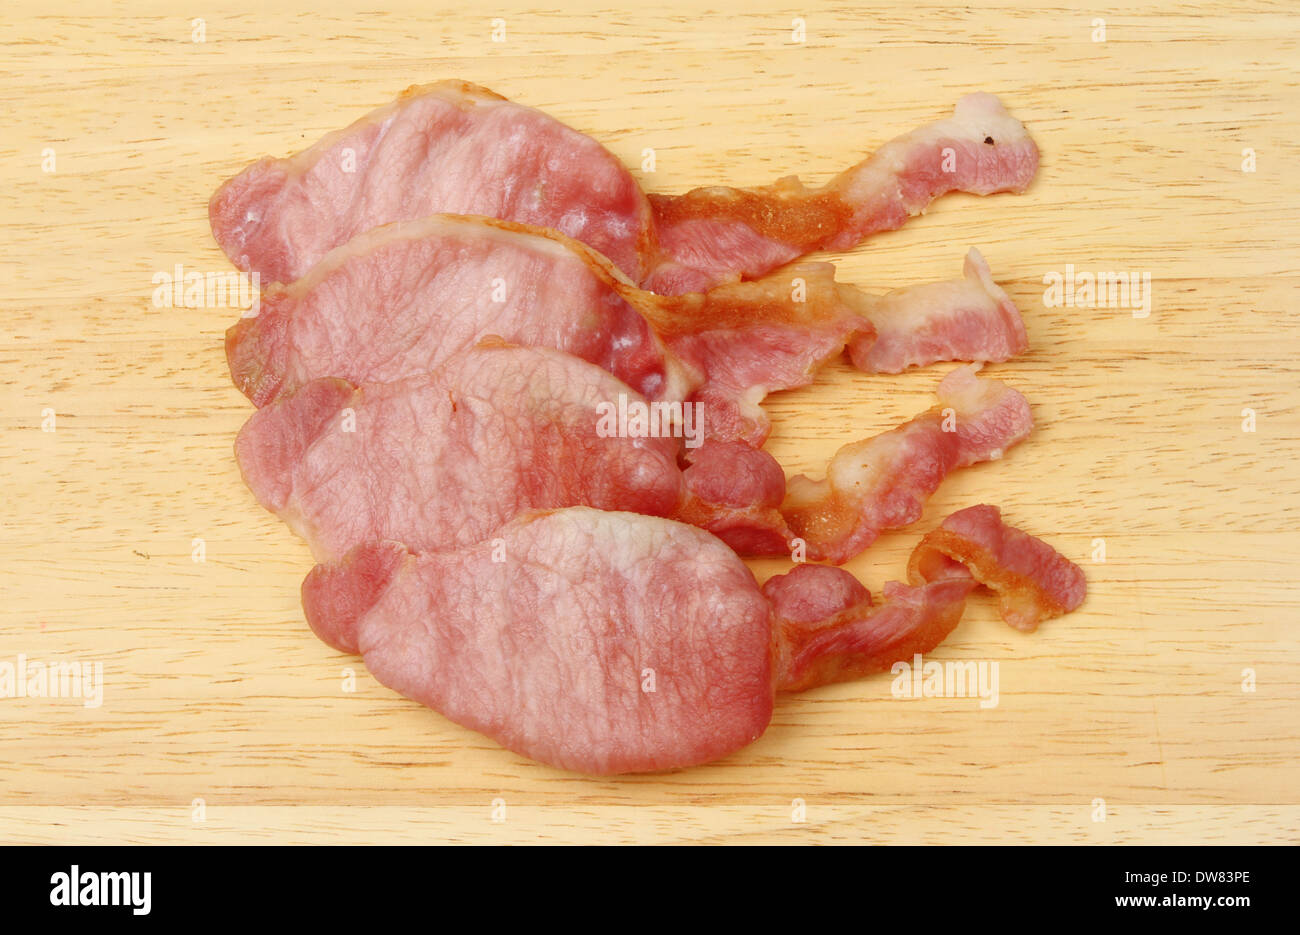 Cooked bacon rashers on a wooden board Stock Photo